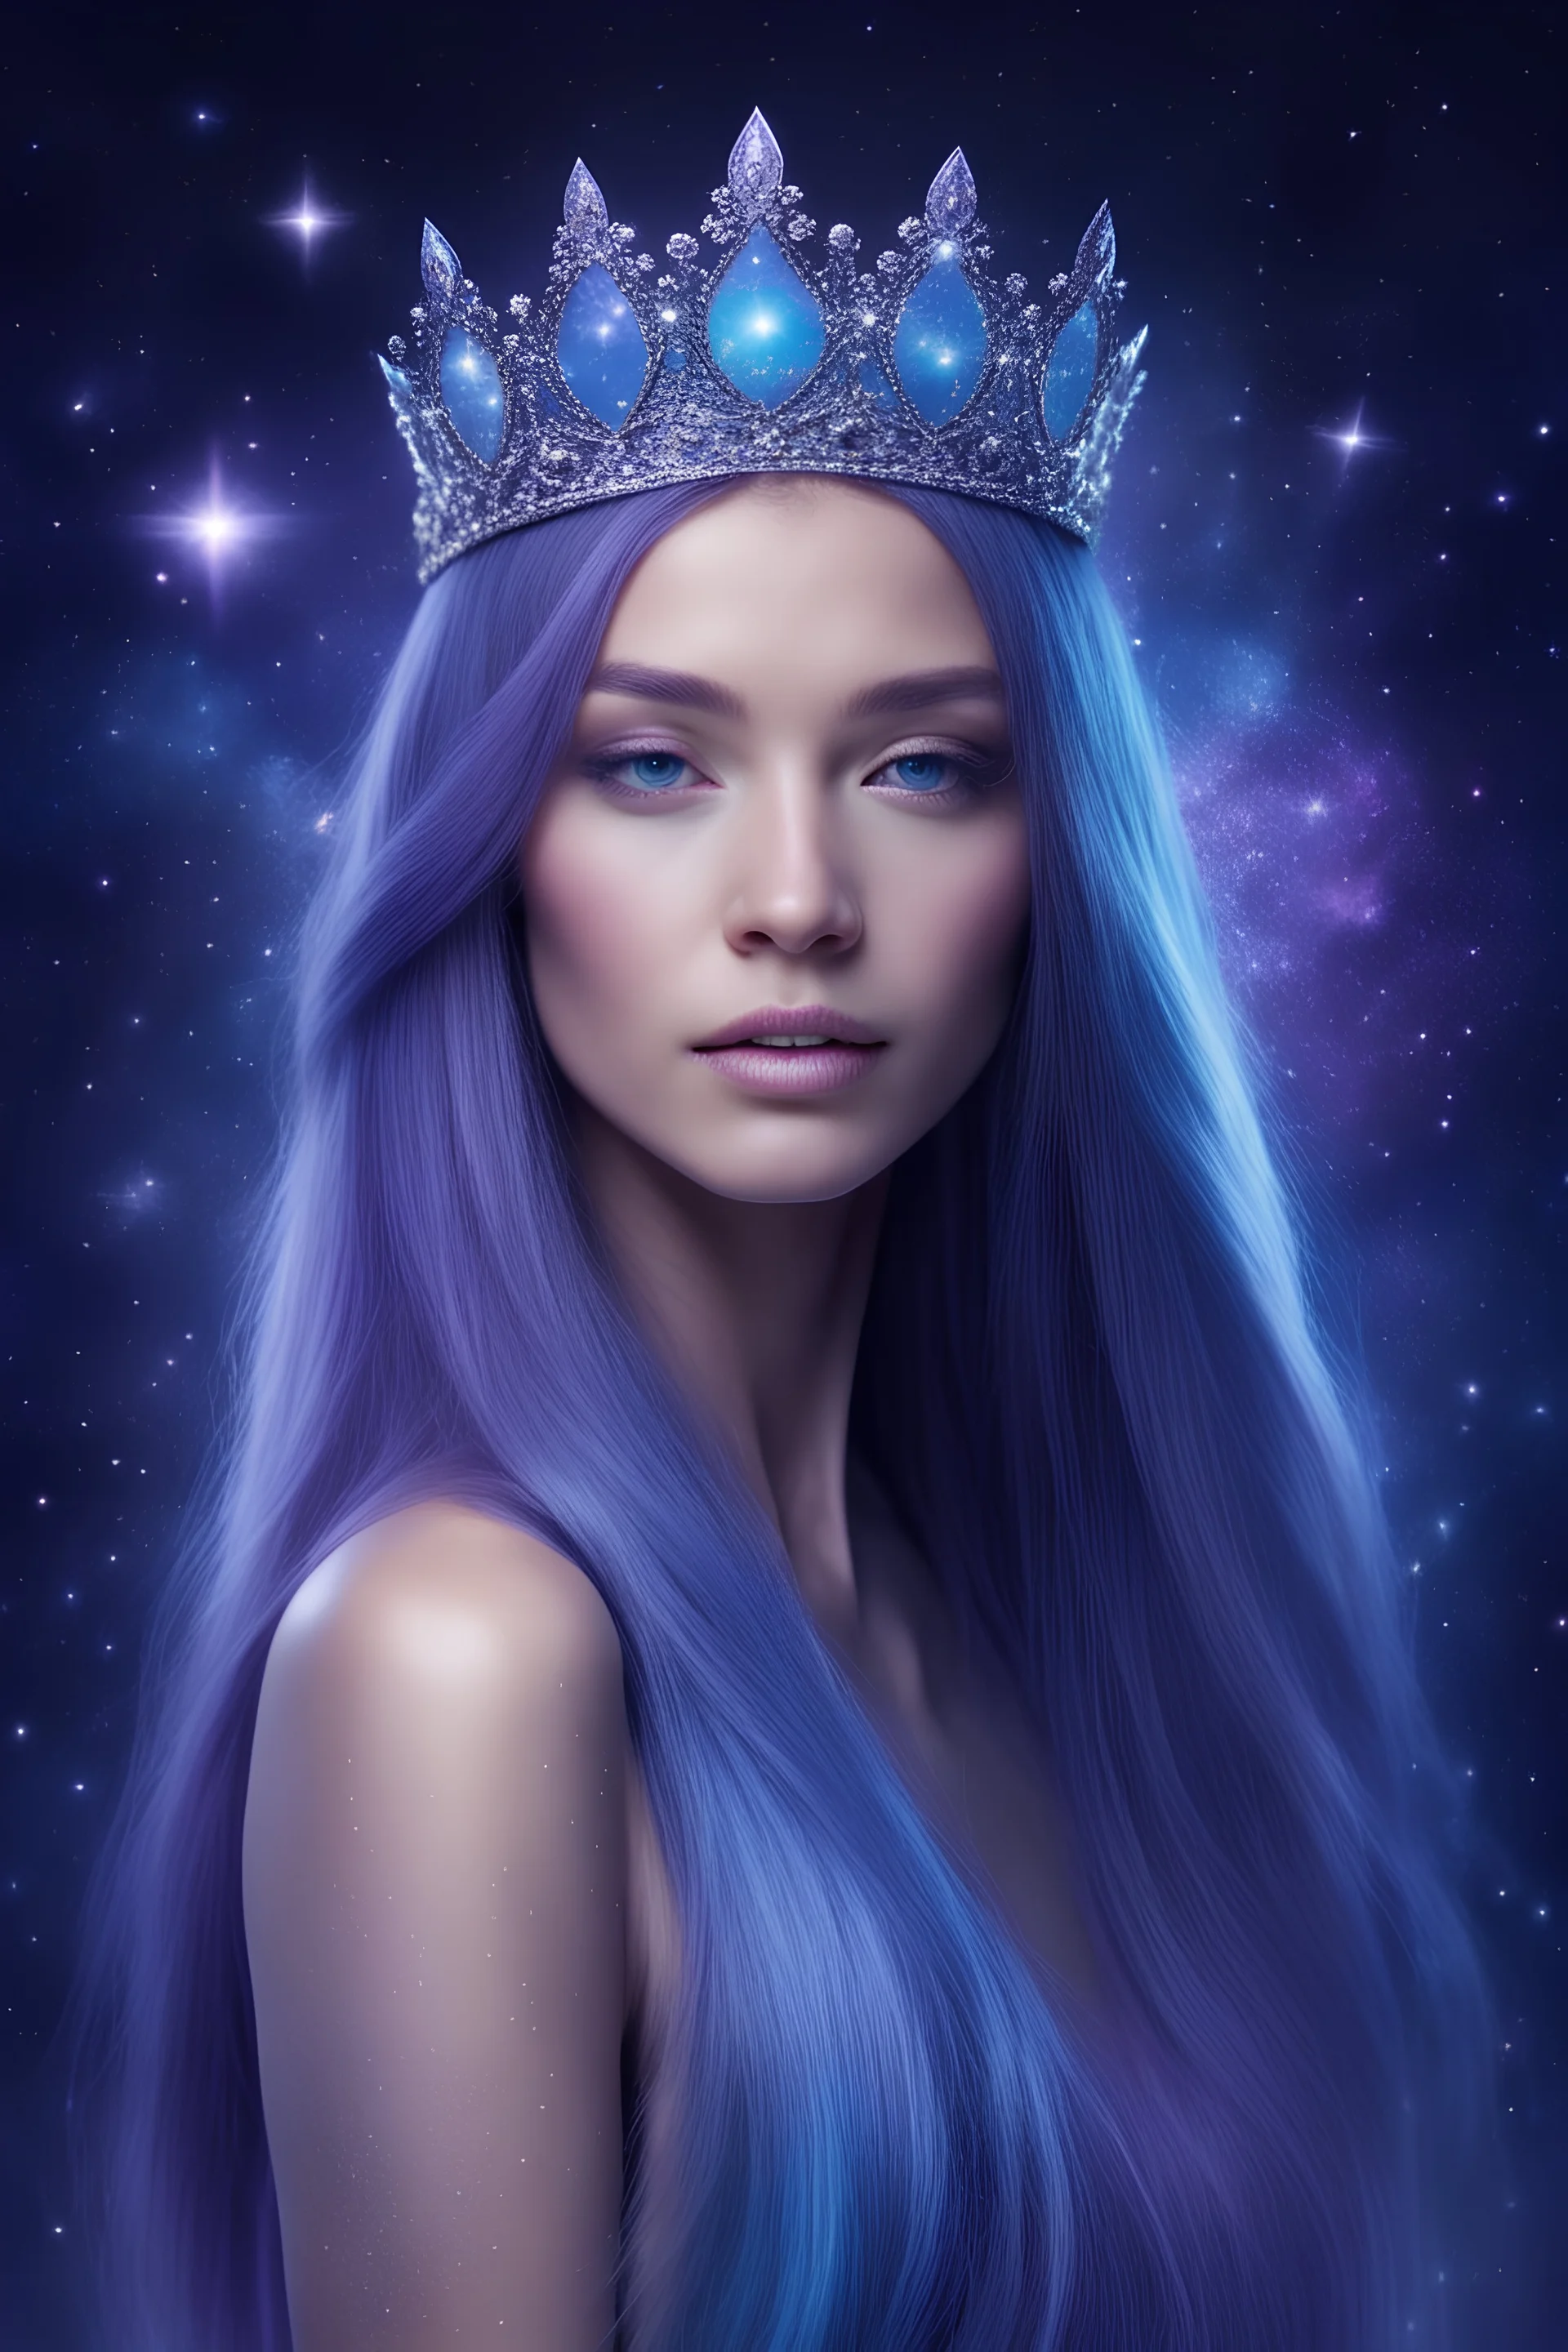 cosmic beautiful woman, with long, straight hair with blue and purple highlights tiara on the hair, in a peaceful background with a cosmic blue purple background , stars